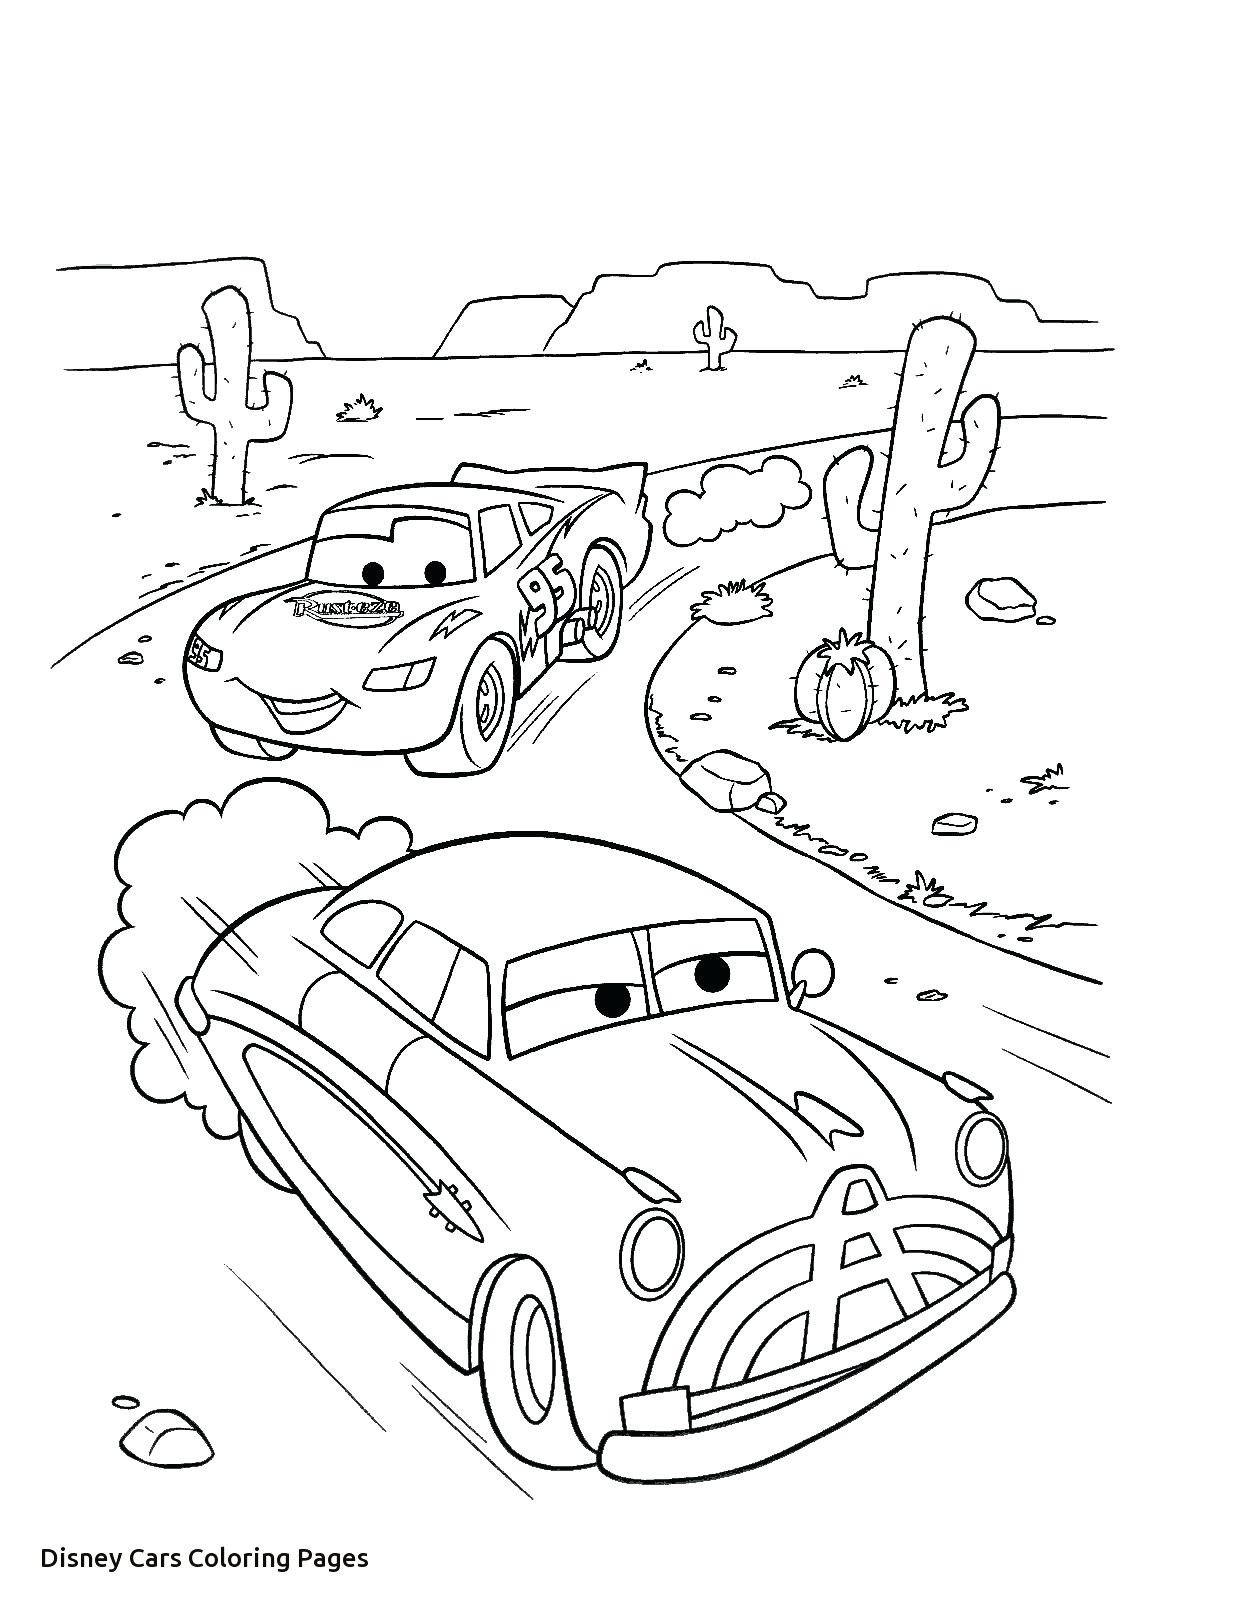 Coloring Pages : Cars Coloring Pictures Awesome Pages For Kids ...